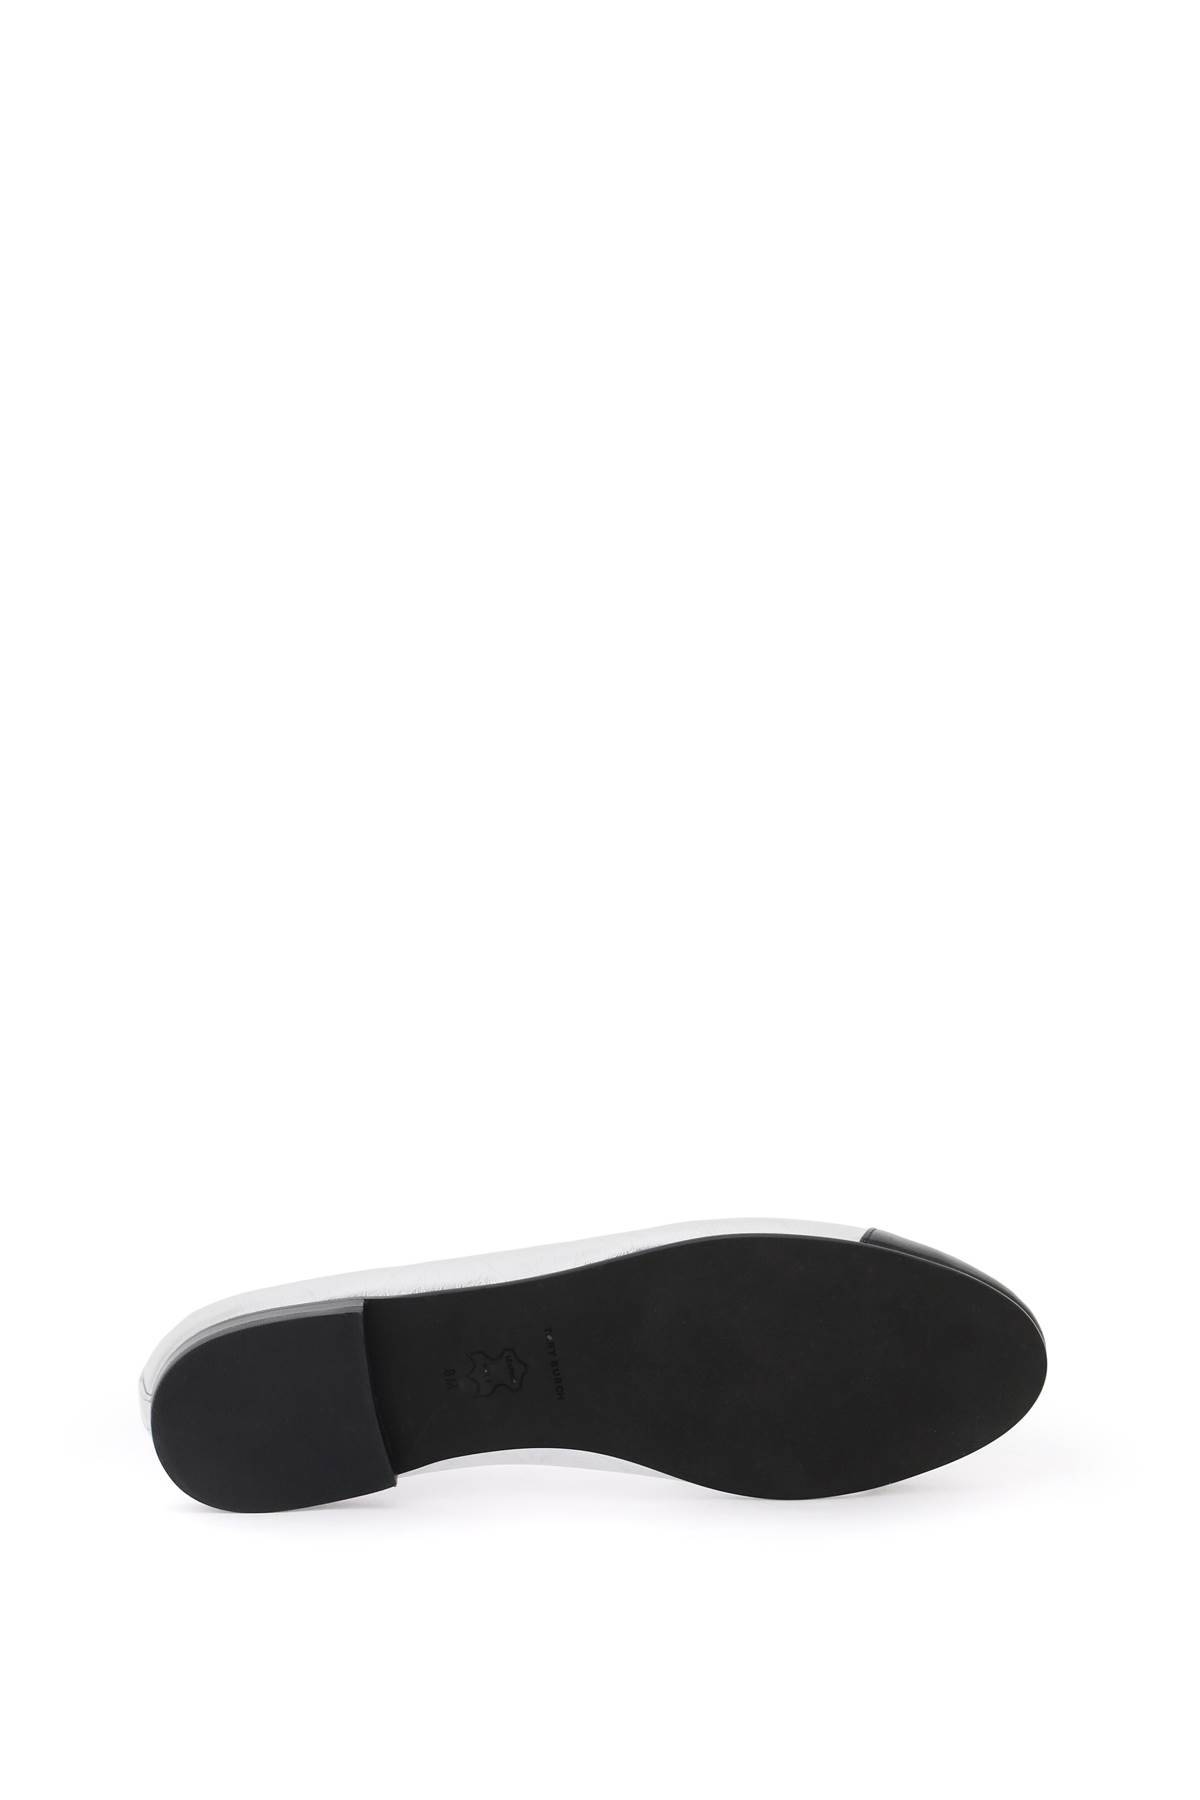 Shop Tory Burch Laminated Ballet Flats With Contrasting Toe In Silver,black